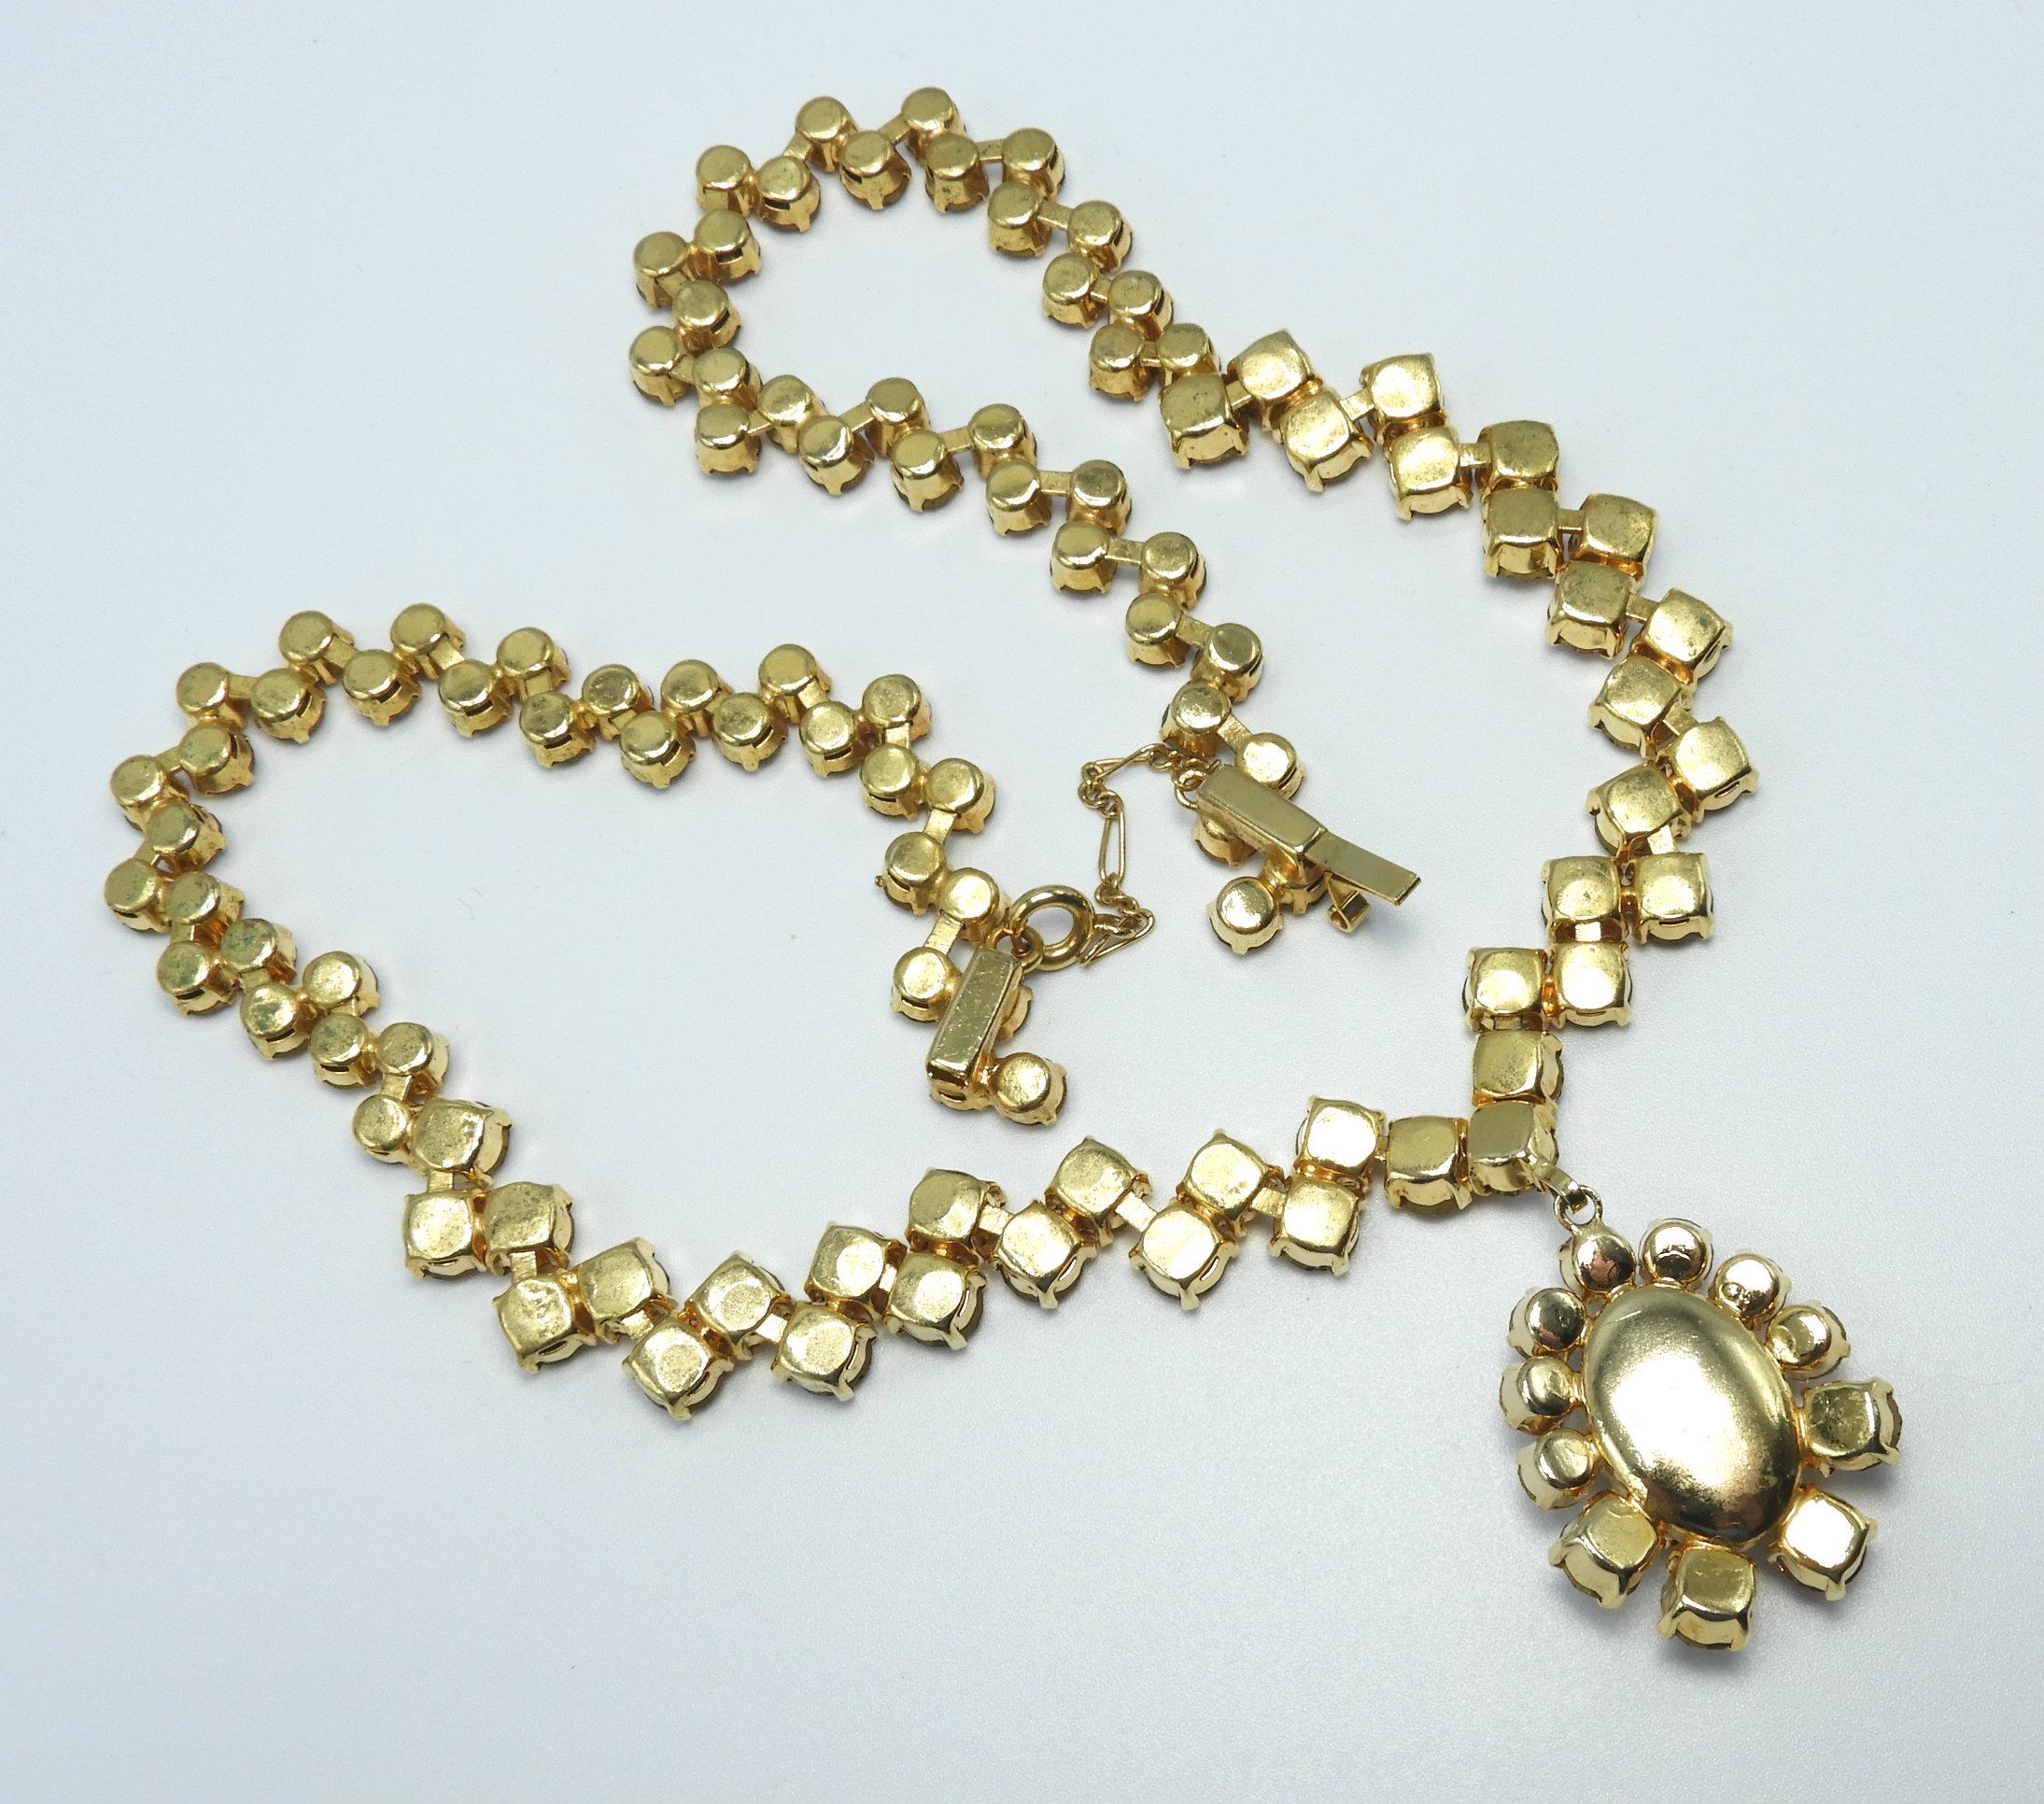 Vintage Amber Colored Rhinestone Necklace with Drop